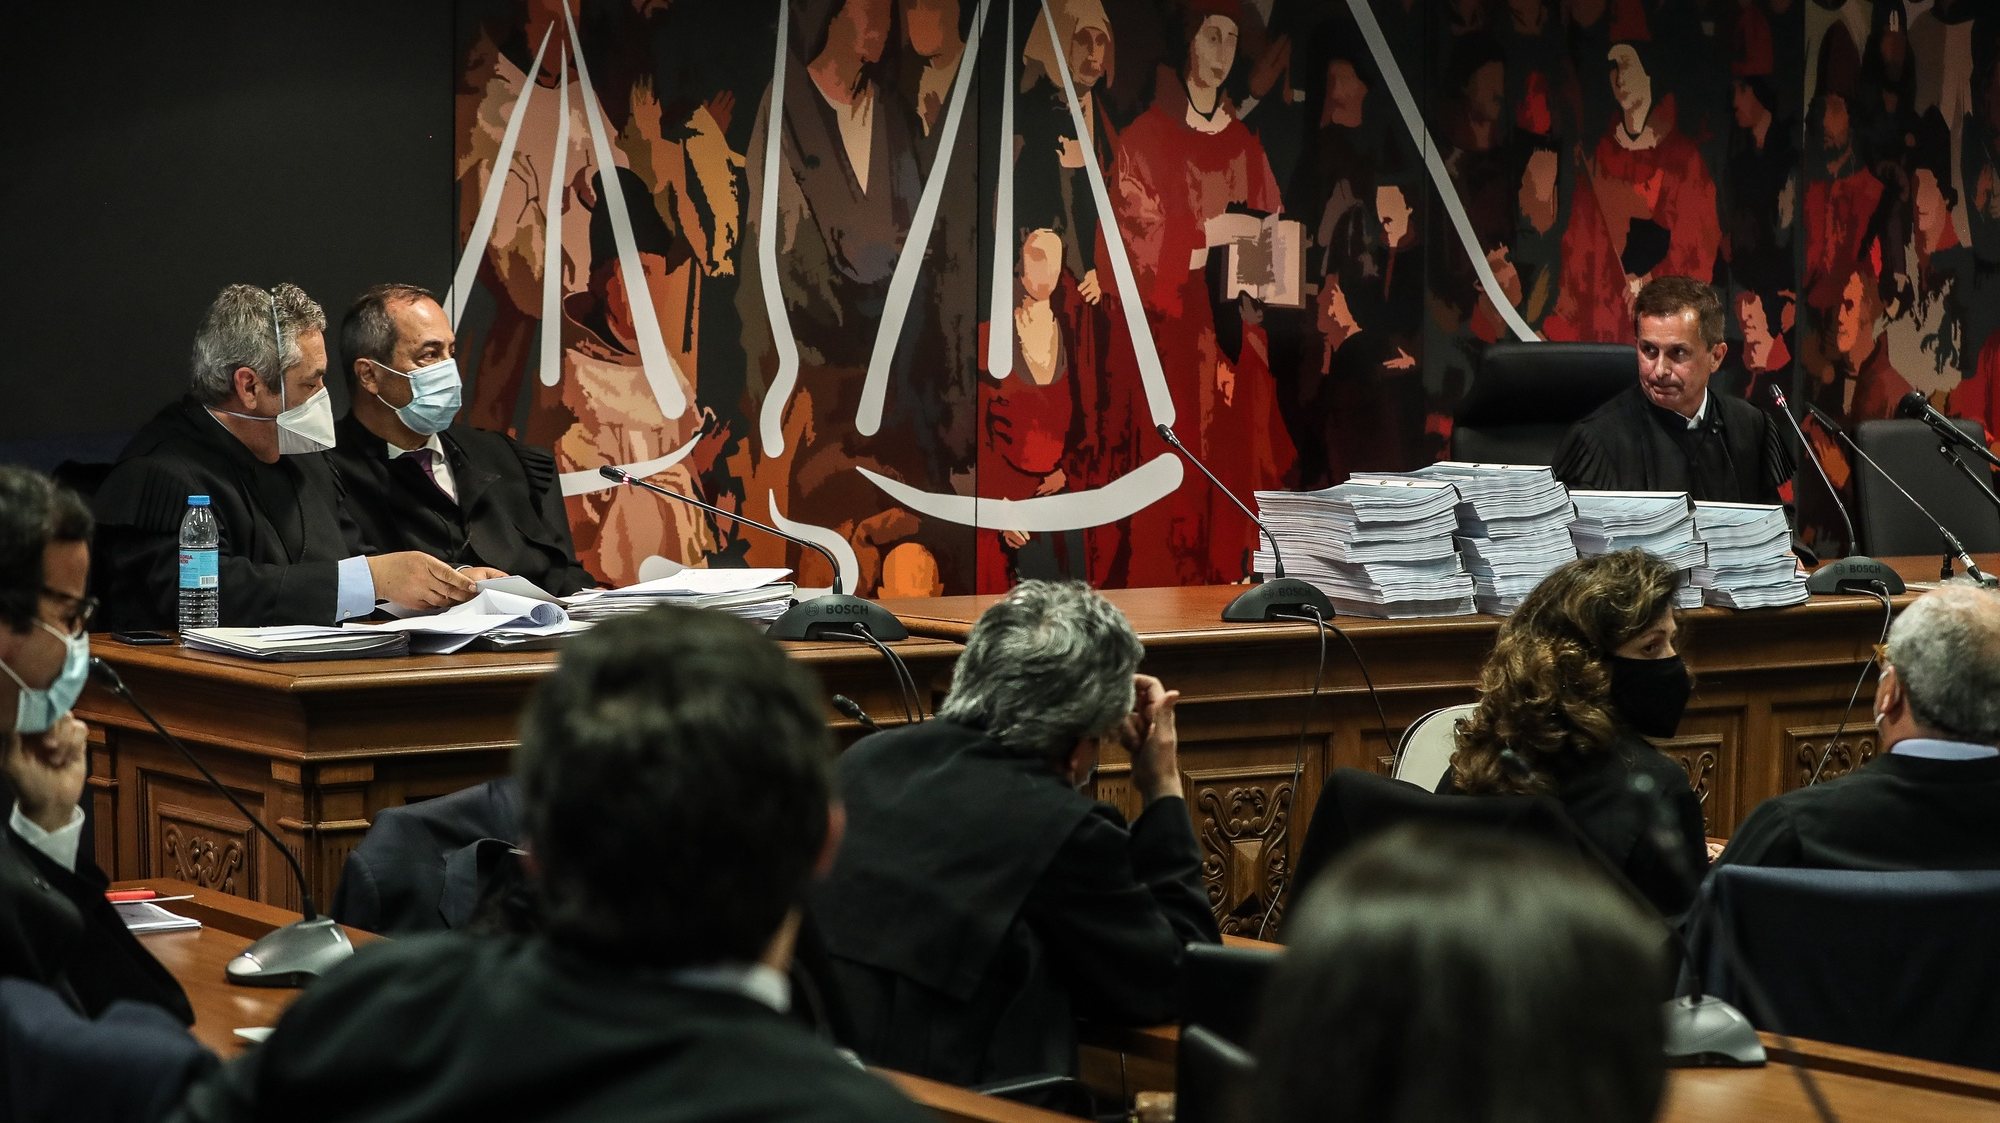 The prosecutor Rosario Teixeira (L), and judges Vitor Pinto (C) and Ivo Rosa during the instructional decision session of the high-profile corruption case known as Operation Marques, which involves the Portugal&#039;s former Prime Minister Jose Socrates,  at the Justice Campus in Lisbon, Portugal, 9 April 2021. Operation Marques has 28 defendants - 19 people and 9 companies - including former Prime Minister Jose Socrates, banker Ricardo Salgado, businessman and friend of Socrates Carlos Santos Silva and senior staff of Portugal Telecom and is related to crimes of corruption, active and passive, money laundering, document forgery and tax fraud. MARIO CRUZ/POOL/LUSA